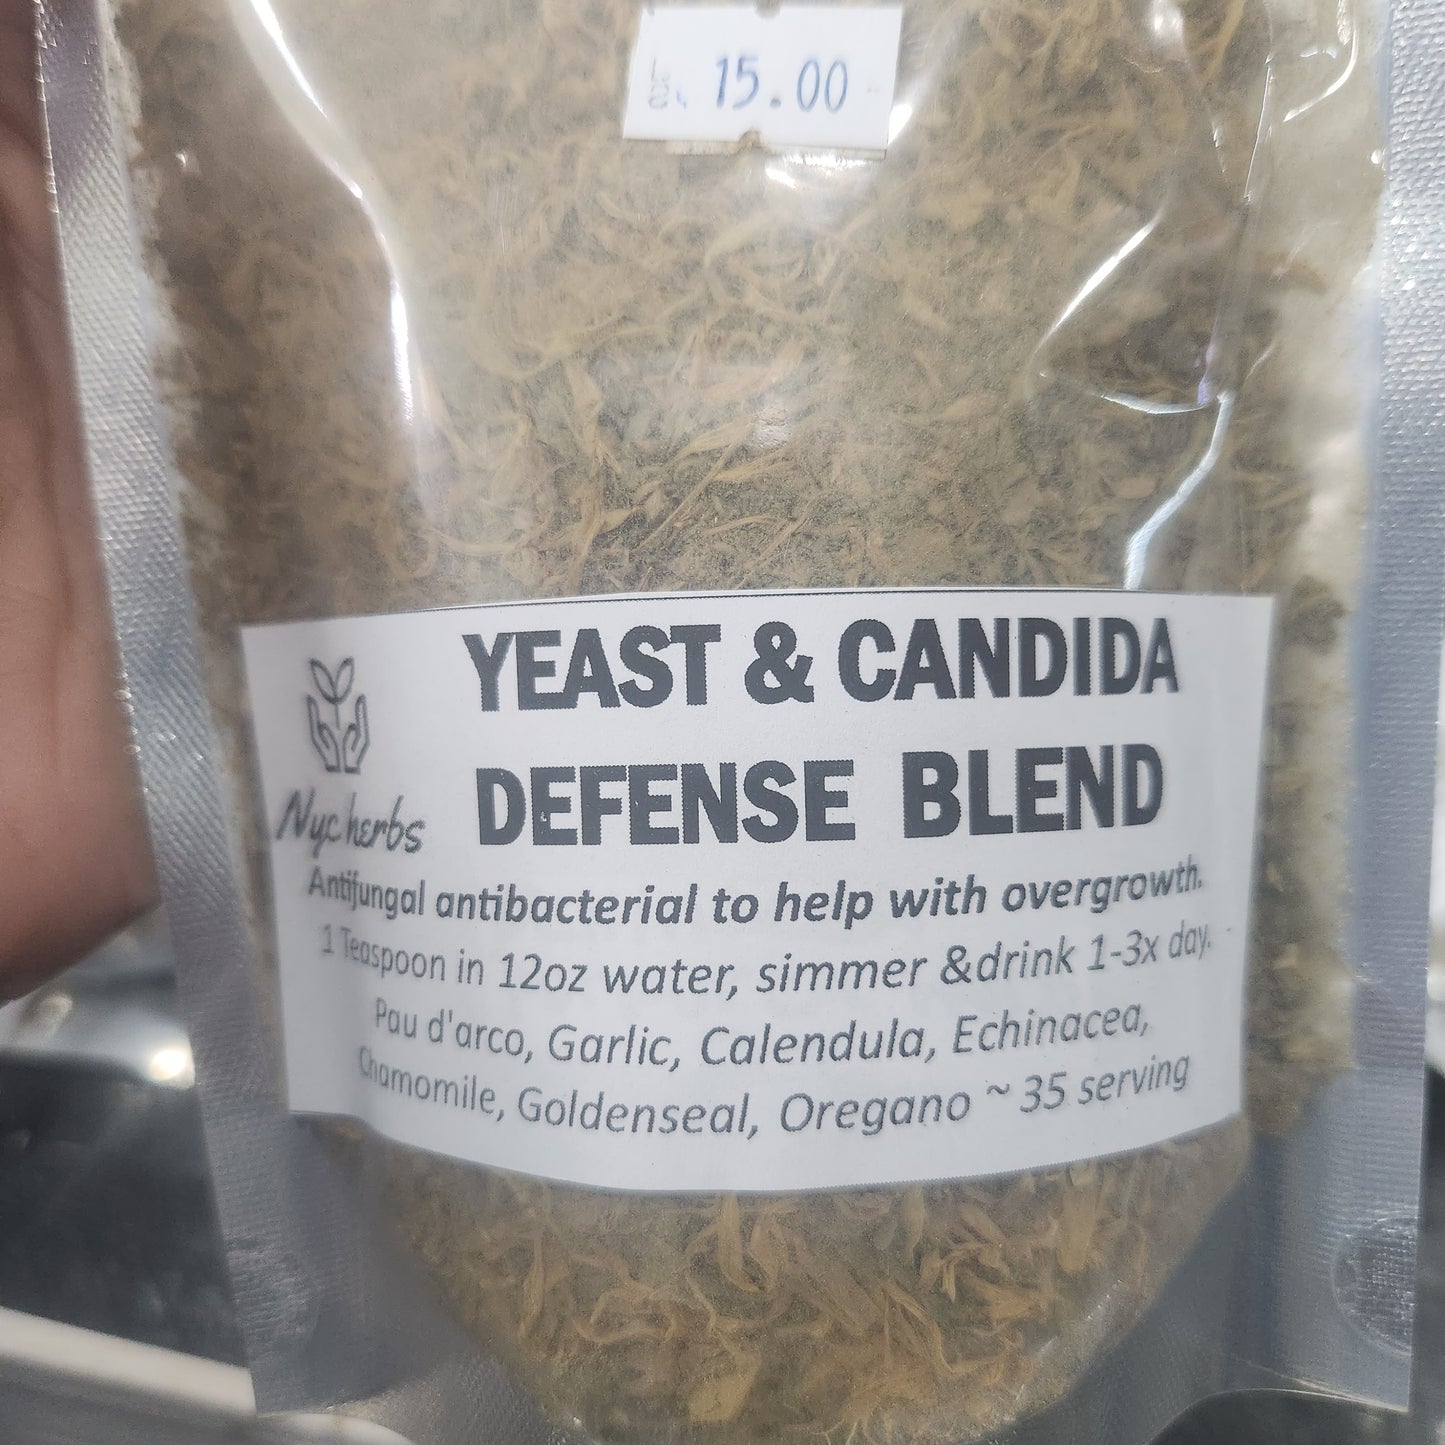 Yeast and candida defense blend